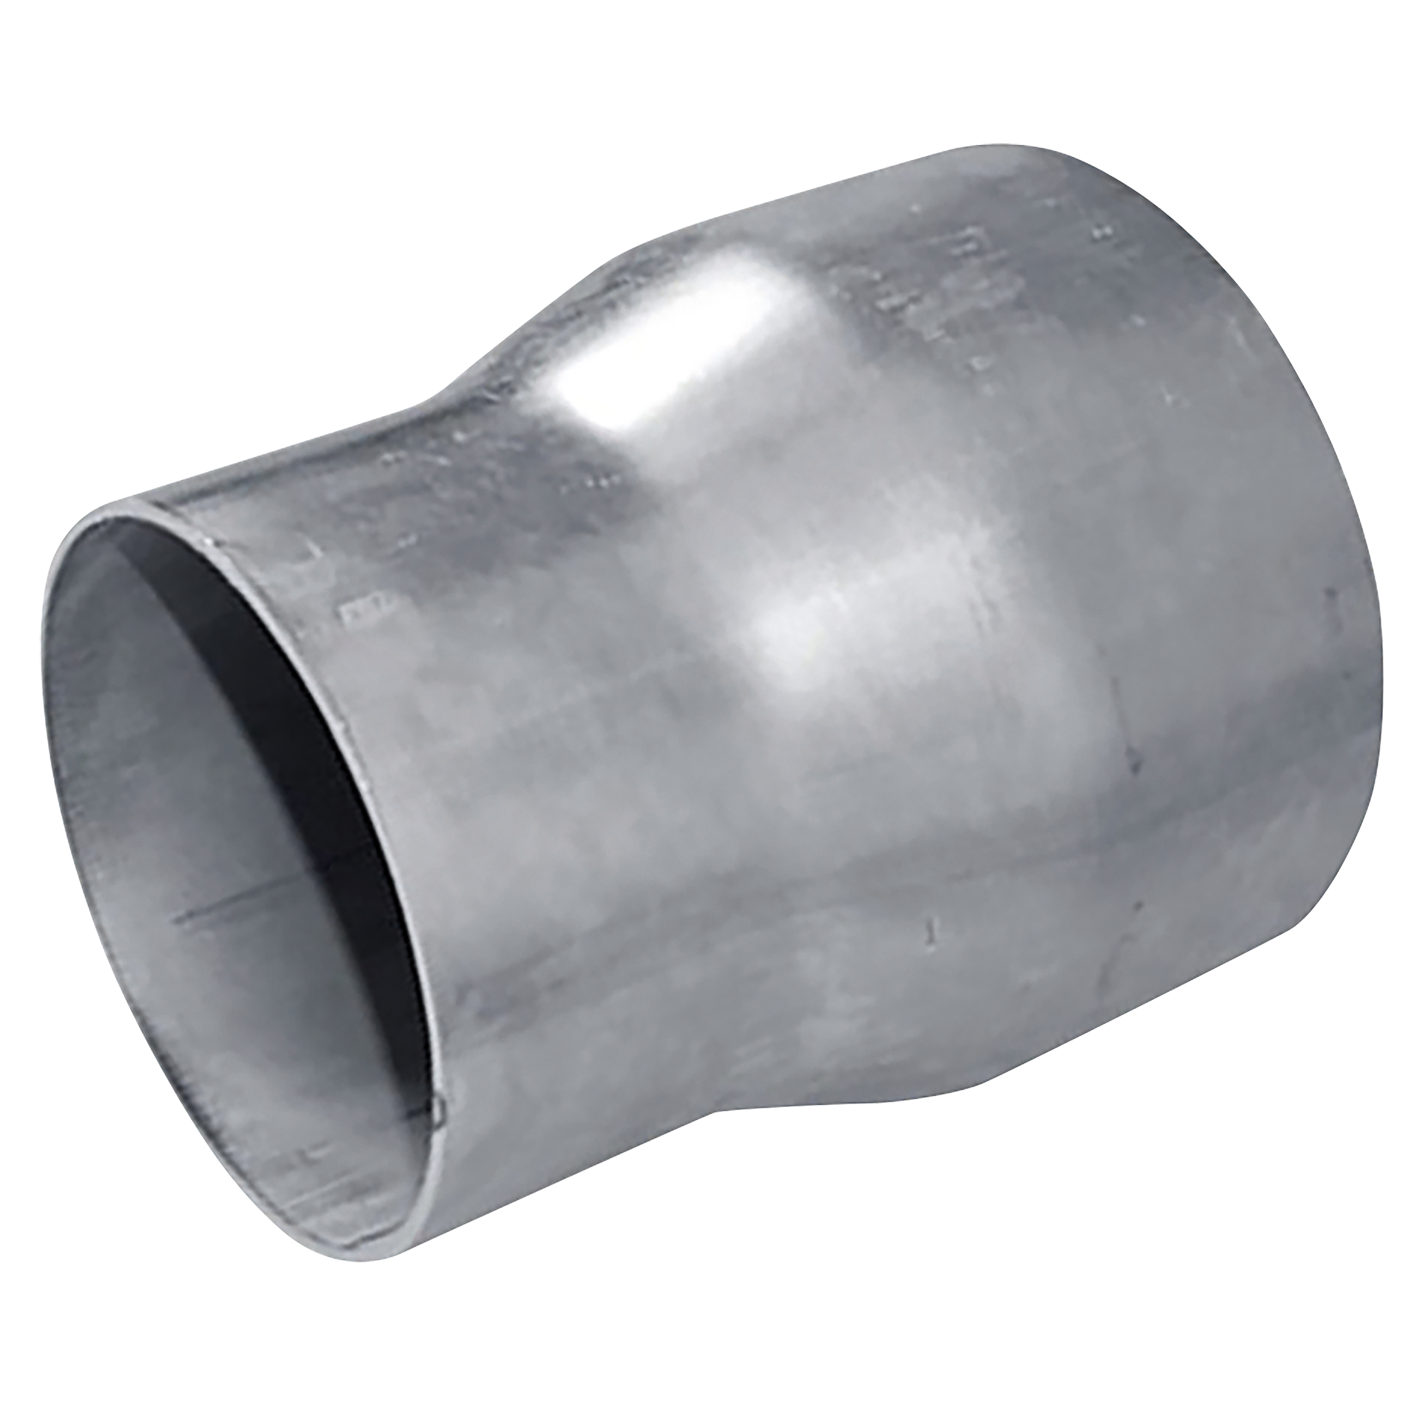 STEEL REDUCING CONE 152MM-108MM OD